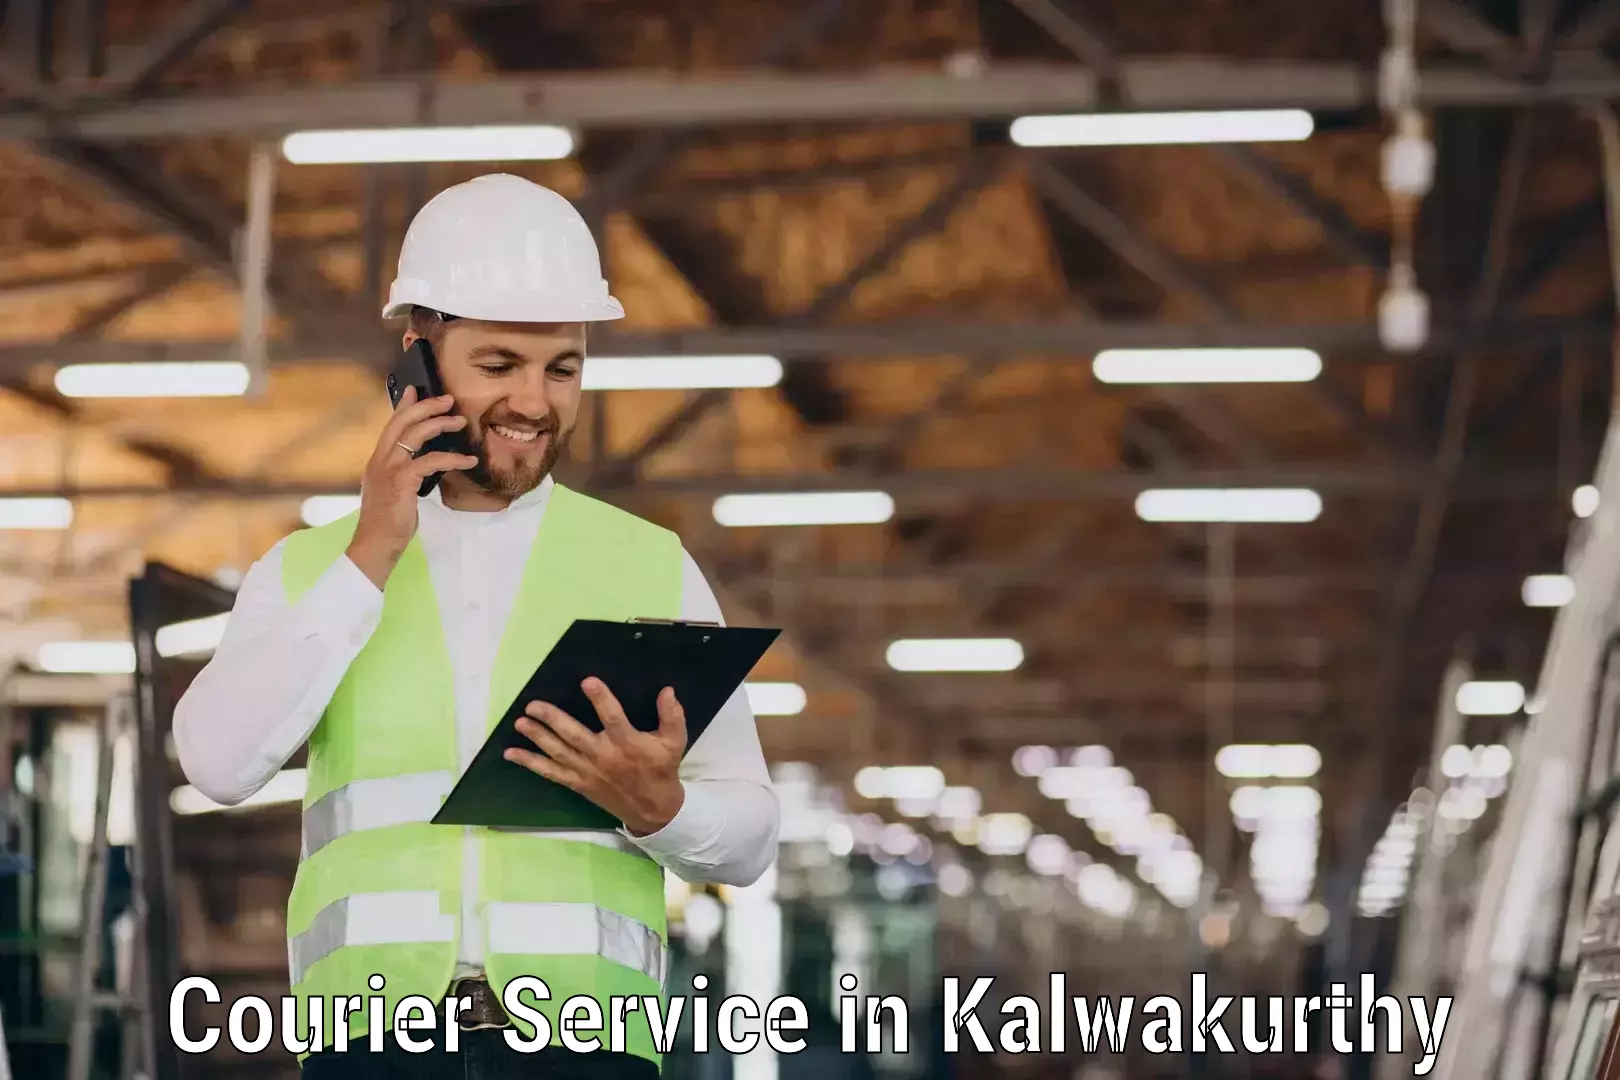 Courier dispatch services in Kalwakurthy